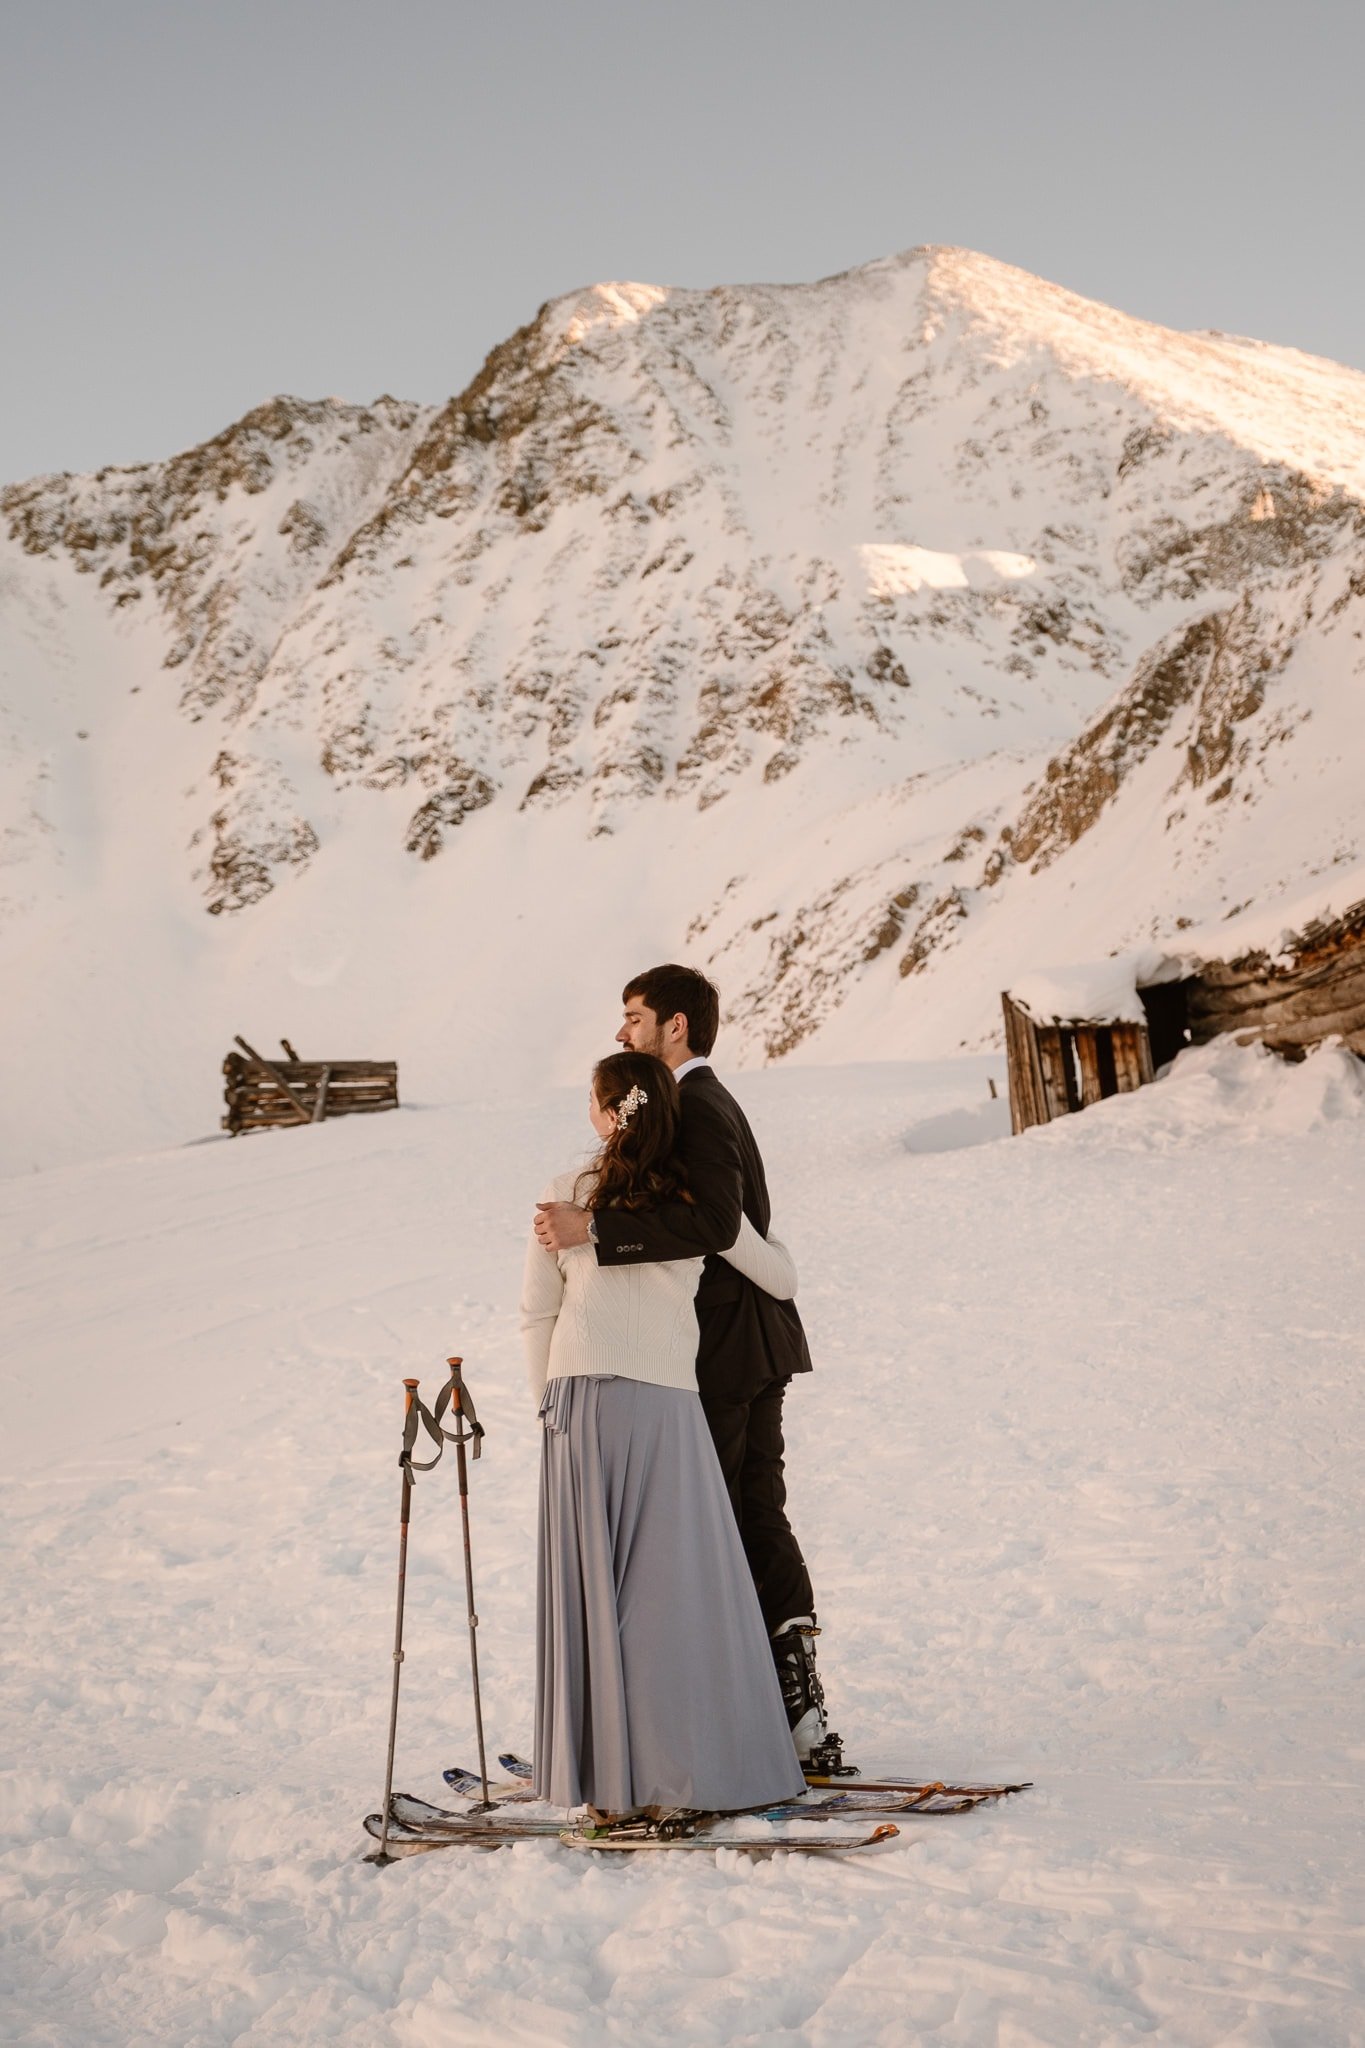 Bride and groom at Mayflower Gulch in Colorado, backcountry skiing elopement, snow covered mining cabins